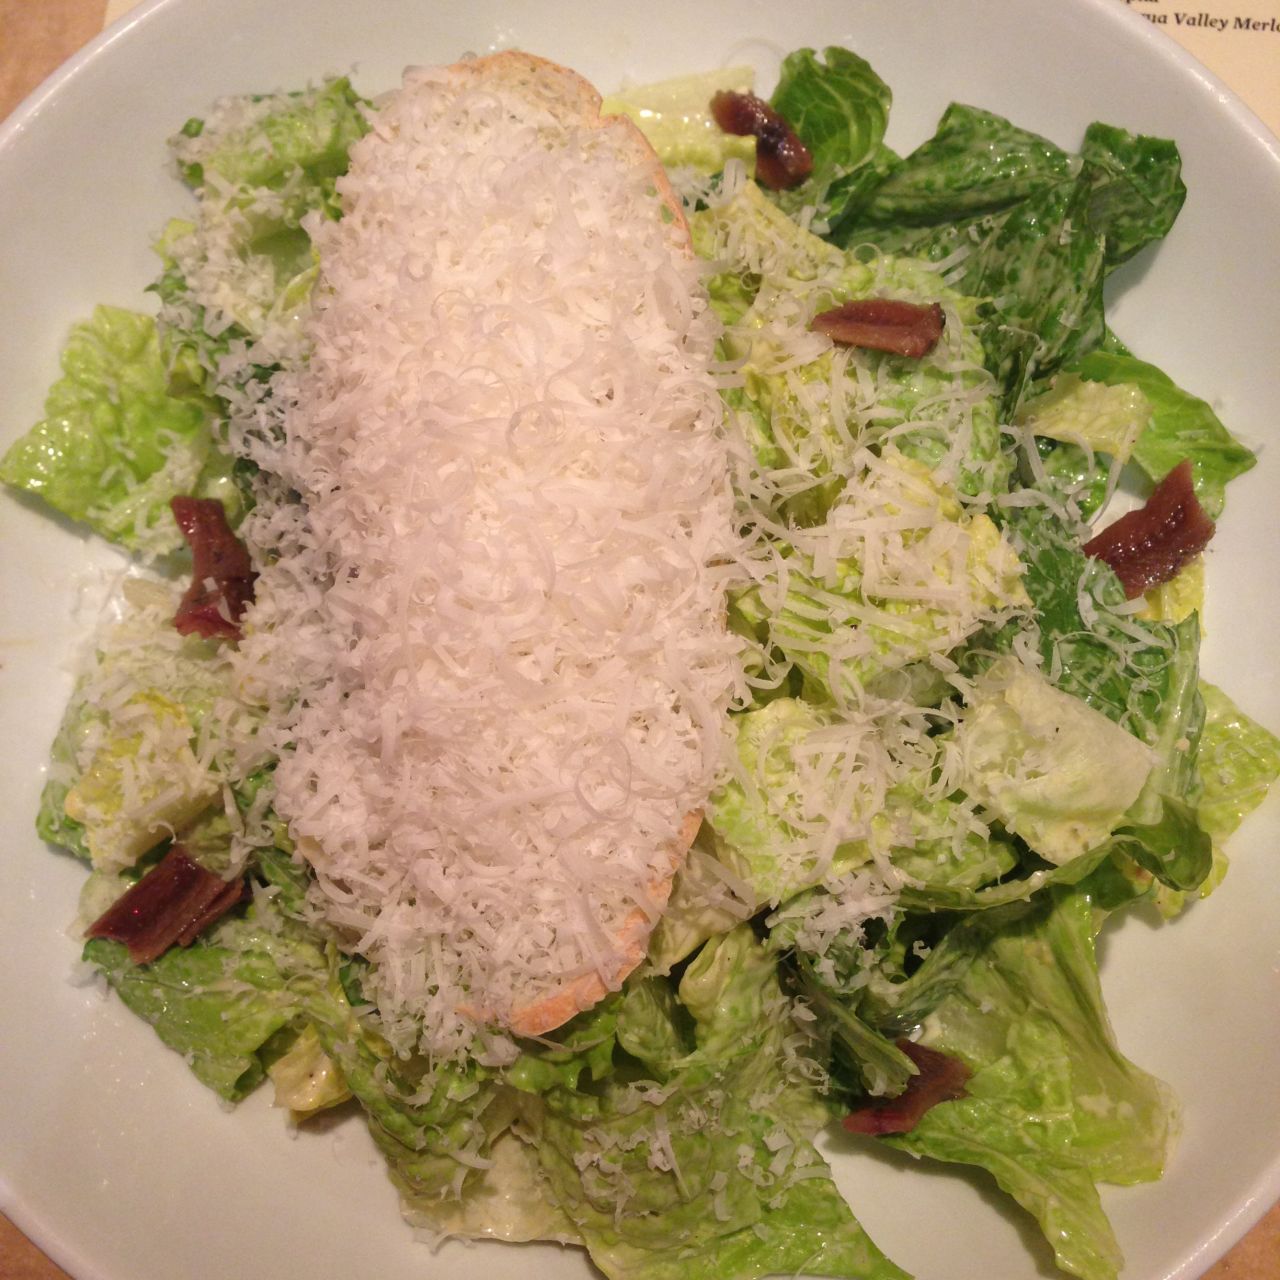 China Poblano, Las Vegas: Ensalada Cesar "Alex Cardini," served in the classic manner, with anchovies, romaine lettuce and Parmesan cheese